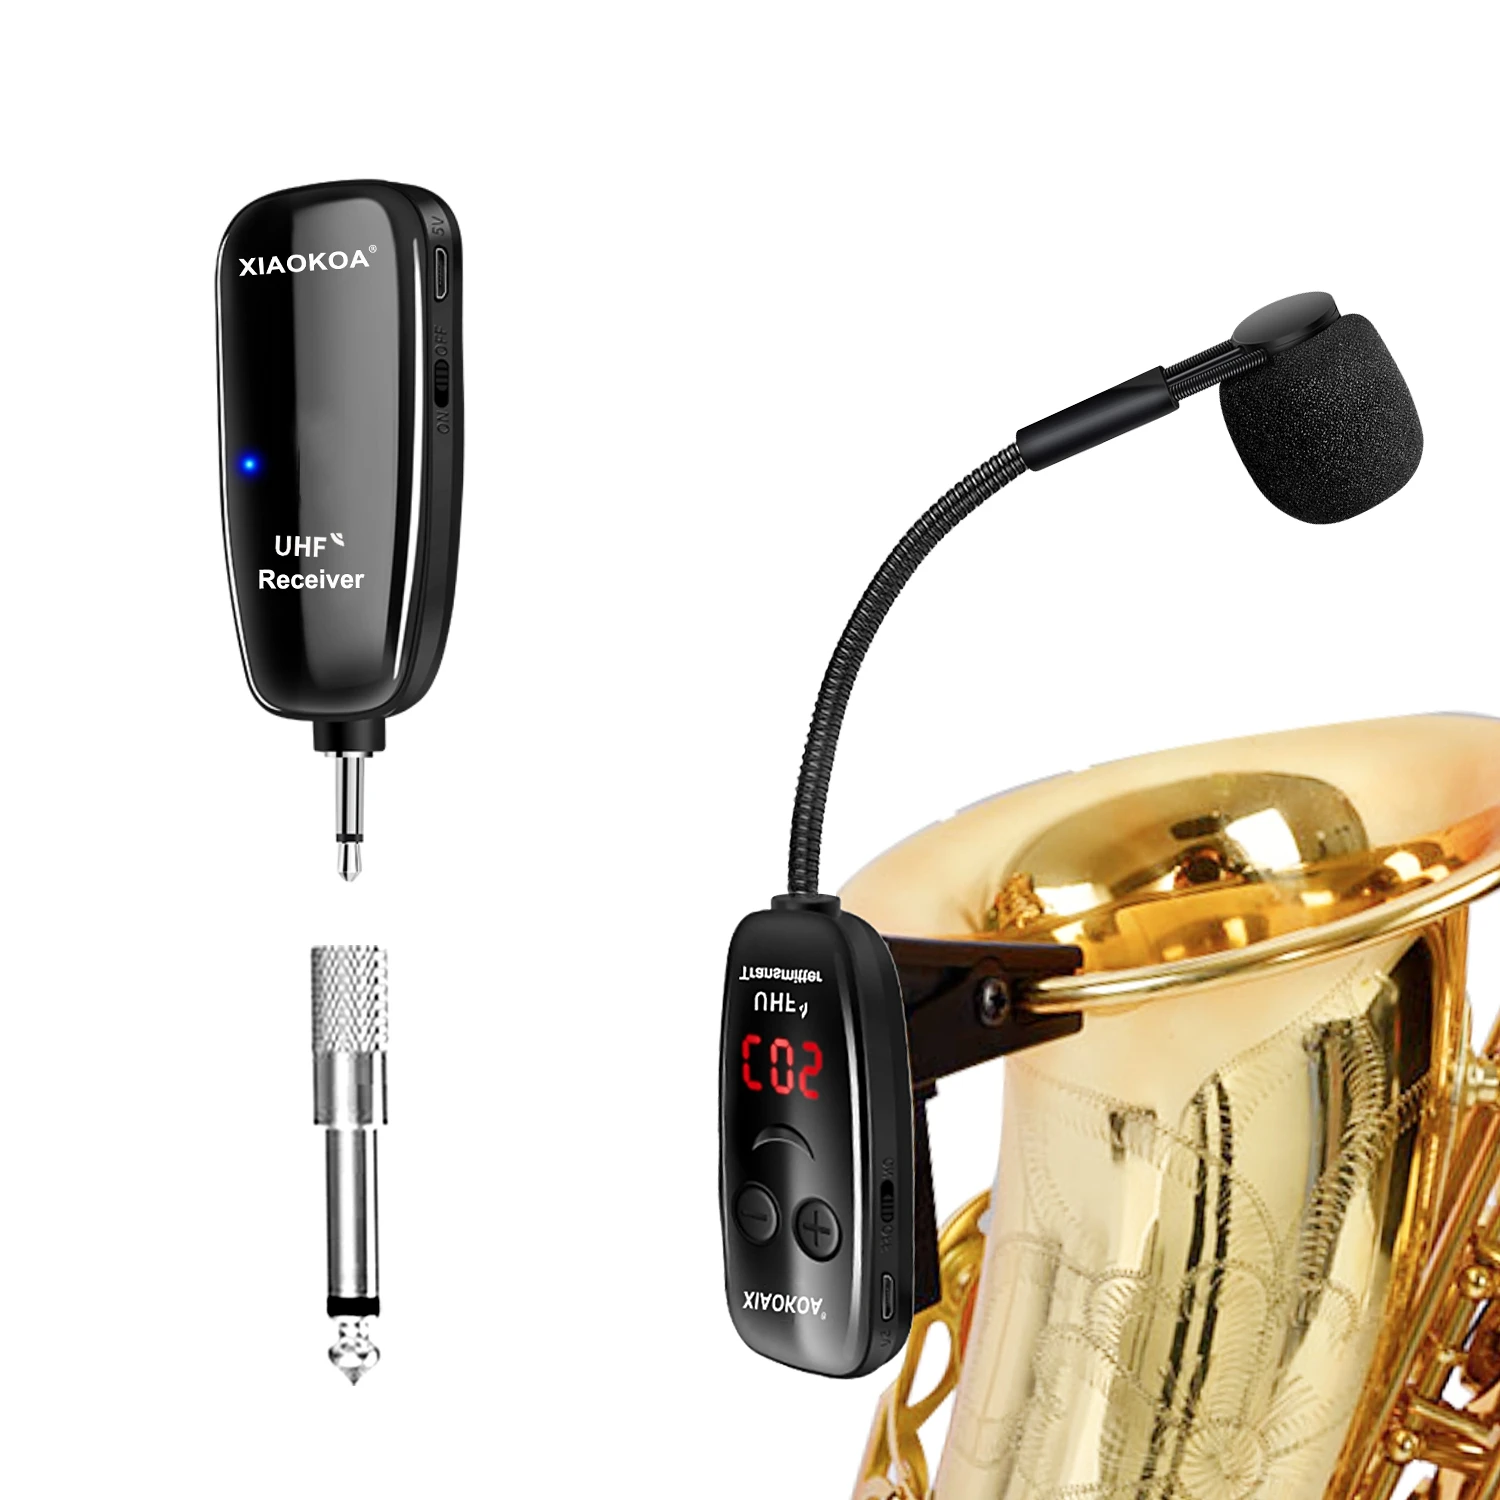 

Xiaokoa UHF wireless instruments saxophone microphone with receiver detachable clip